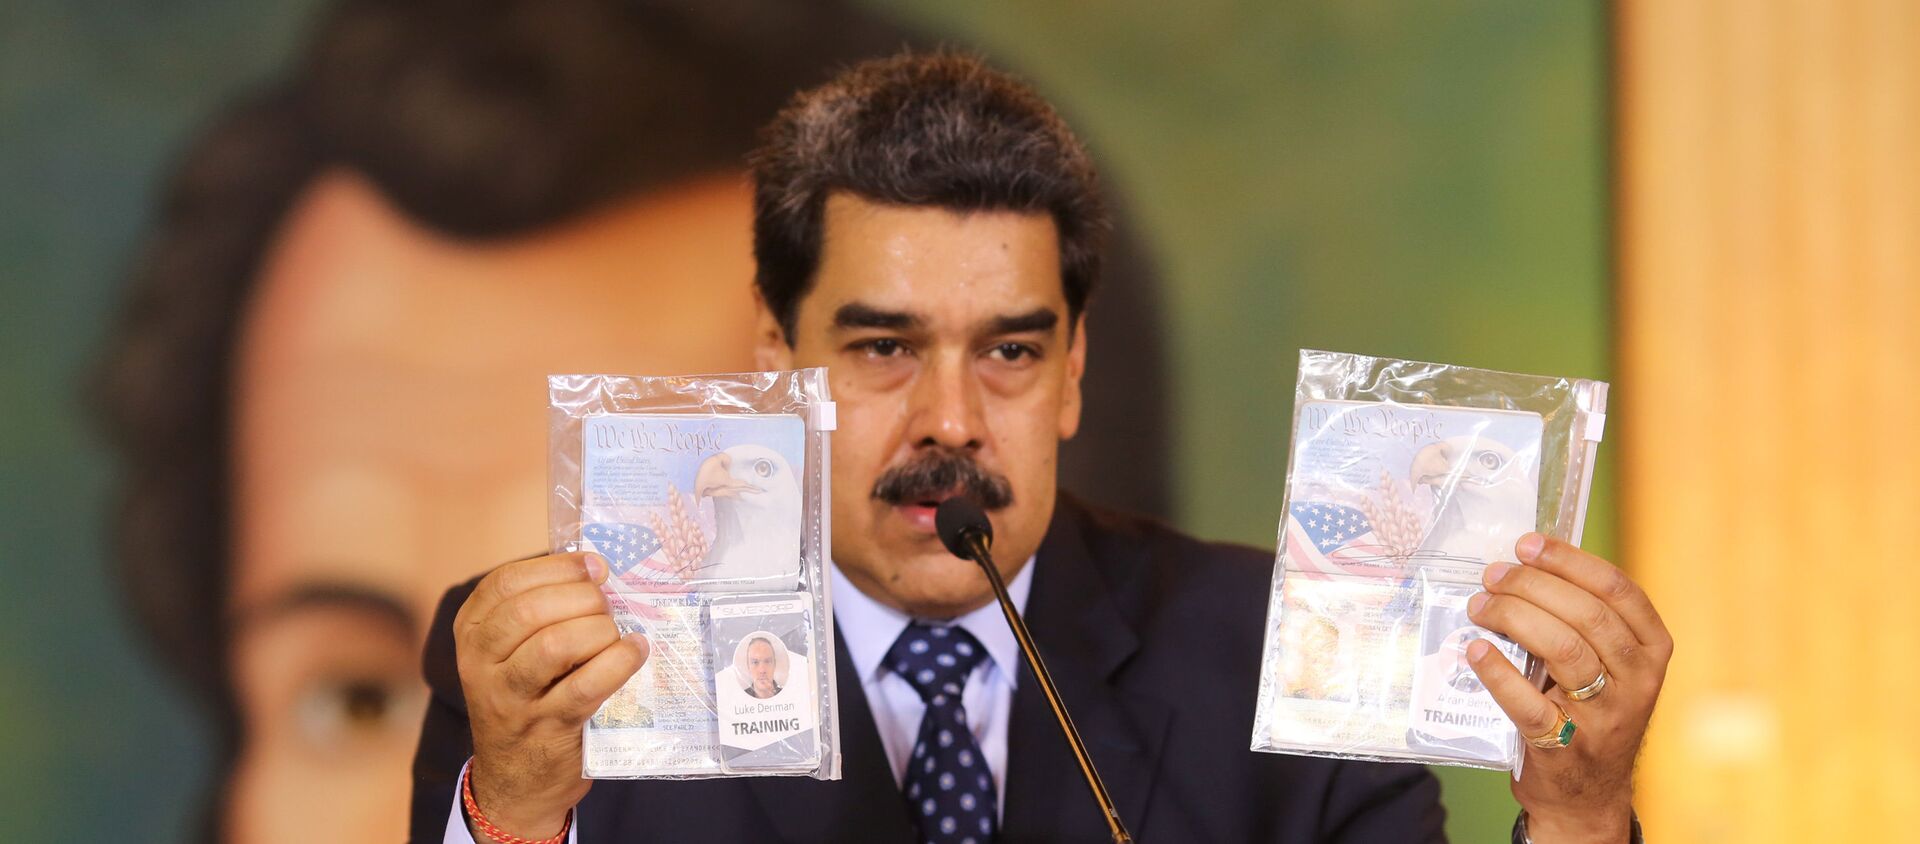 Personal documents are shown by Venezuela's President Nicolas Maduro during a virtual news conference in Caracas, Venezuela May 6, 2020. - Sputnik International, 1920, 15.05.2020